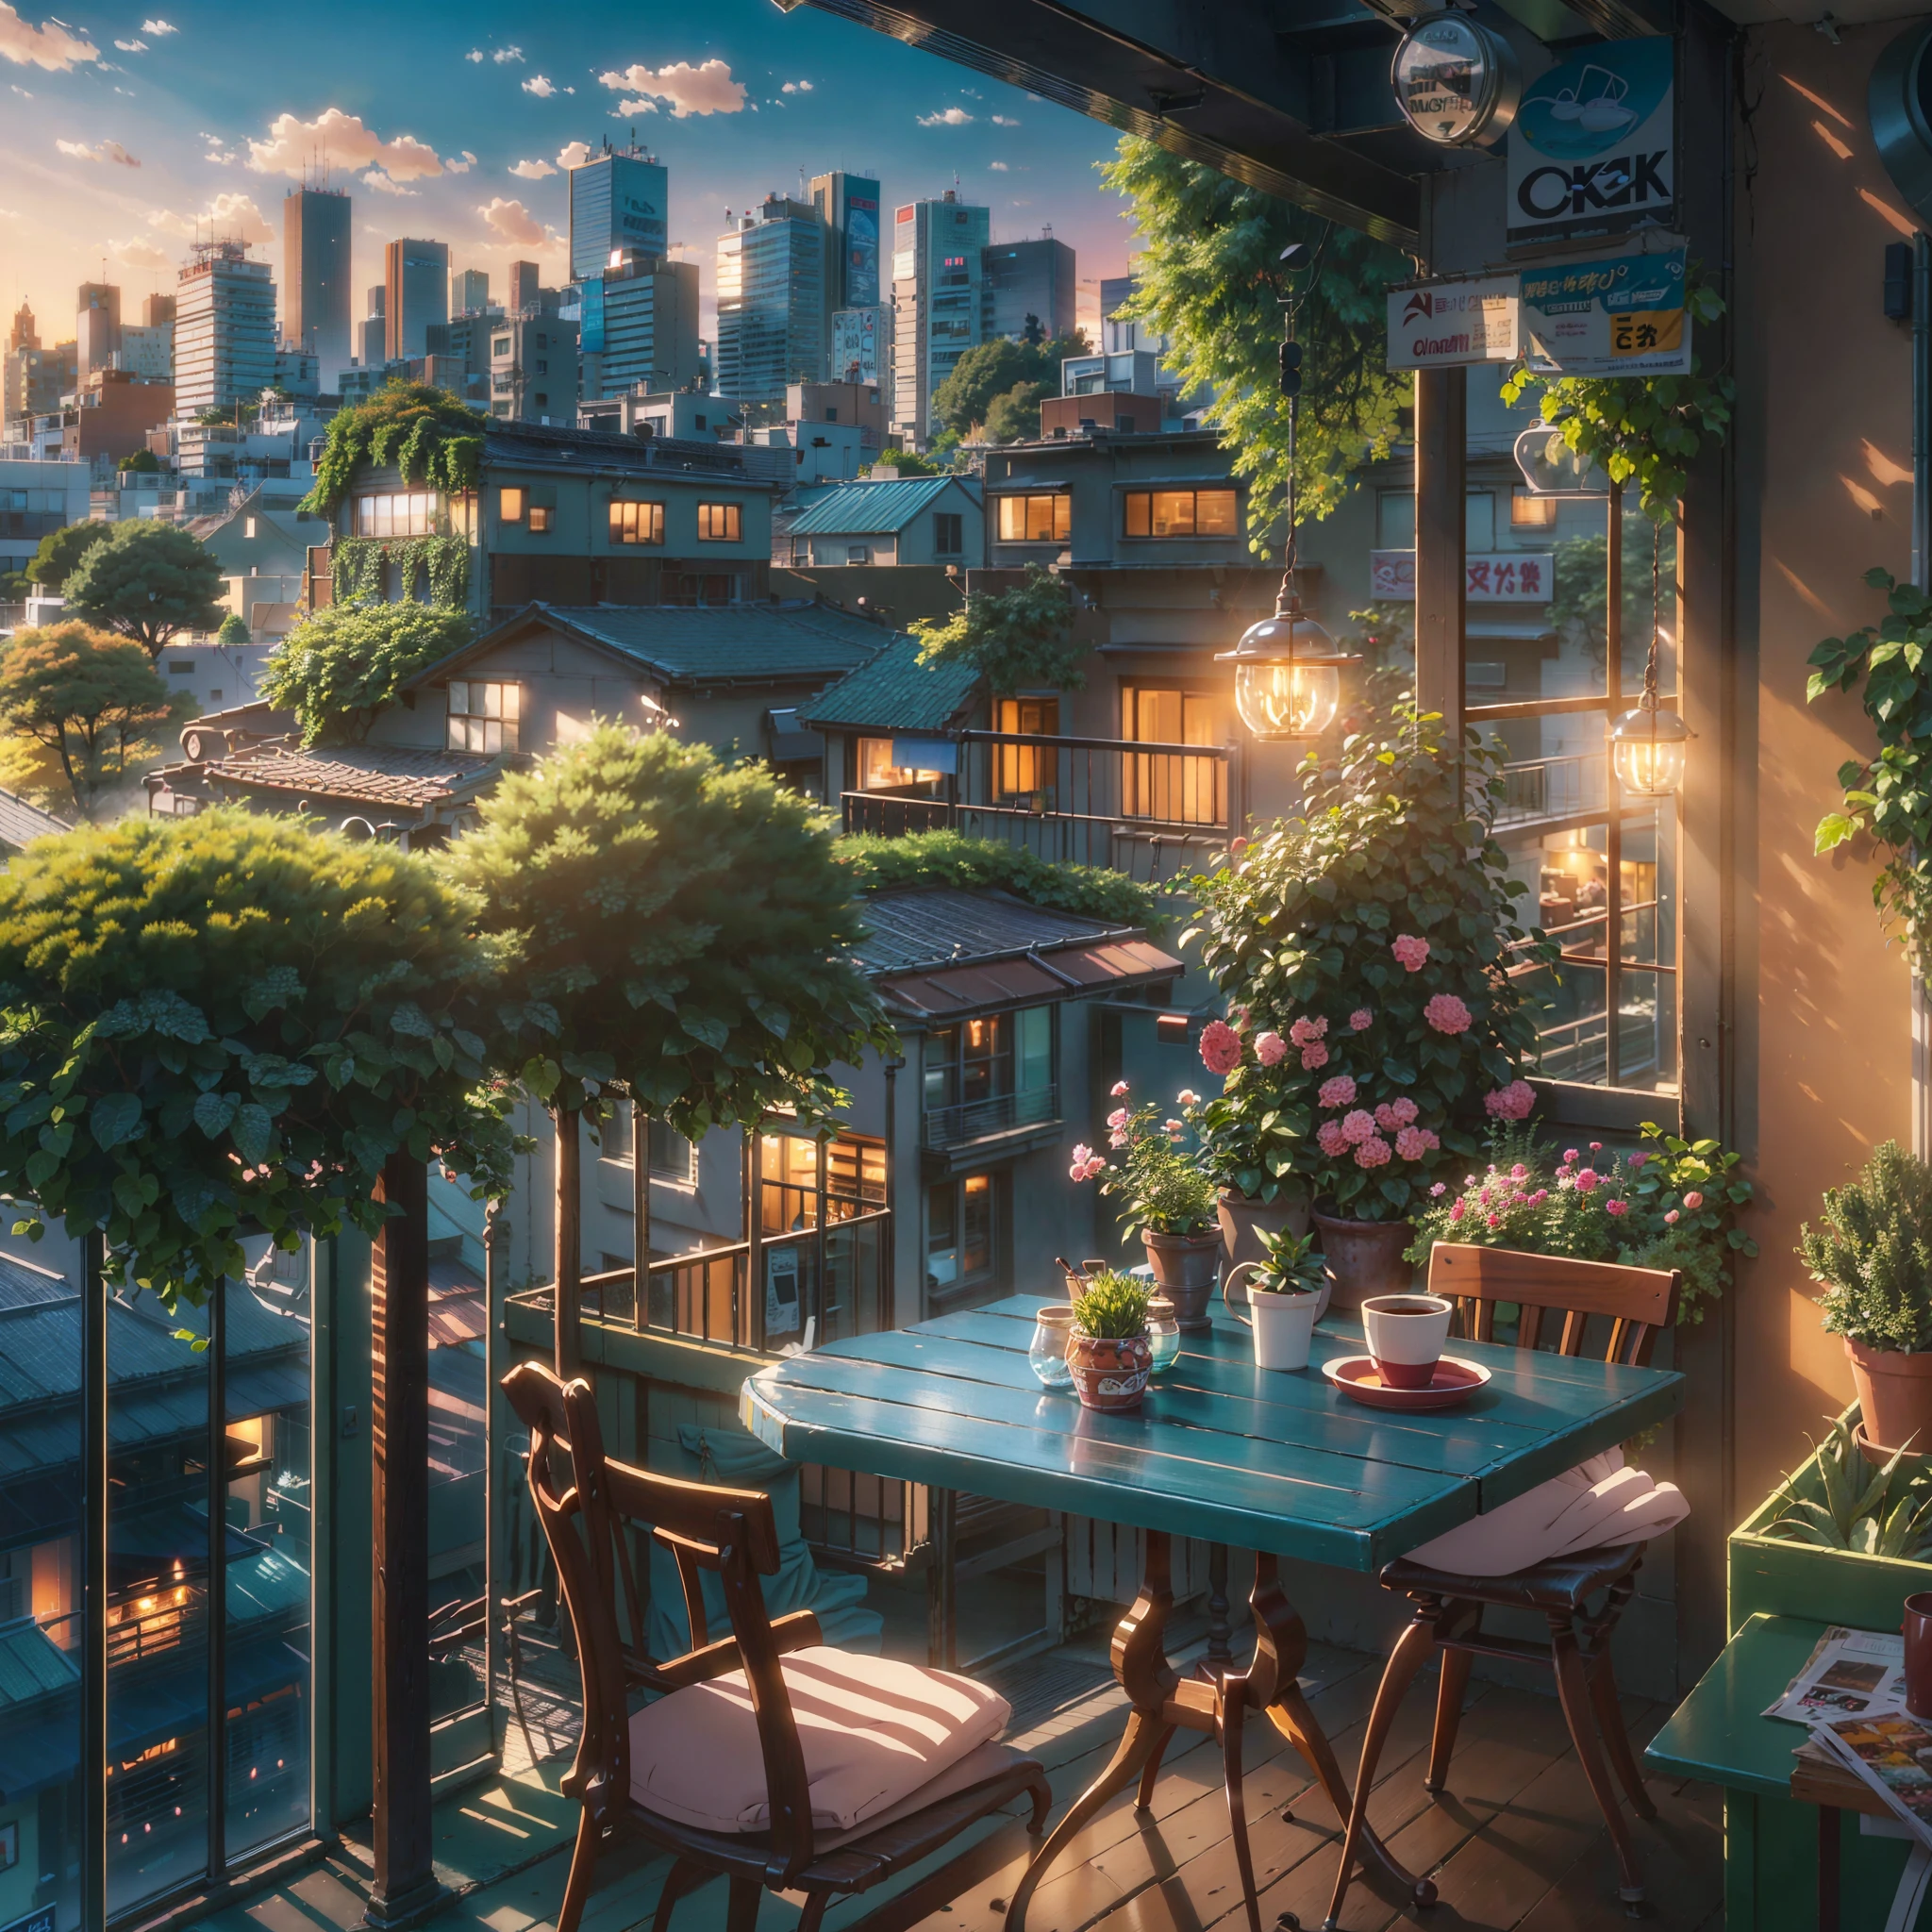 there is a table and chairs on a balcony with a view of the city, anime background art, cozy cafe background, beautiful cityscape, anime art wallpaper 4k, anime art wallpaper 4 k, beautiful anime scene, 4k anime wallpaper, anime art wallpaper 8 k, anime background, anime wallpaper 4 k, anime wallpaper 4k, colorful anime movie background, amazing wallpaper